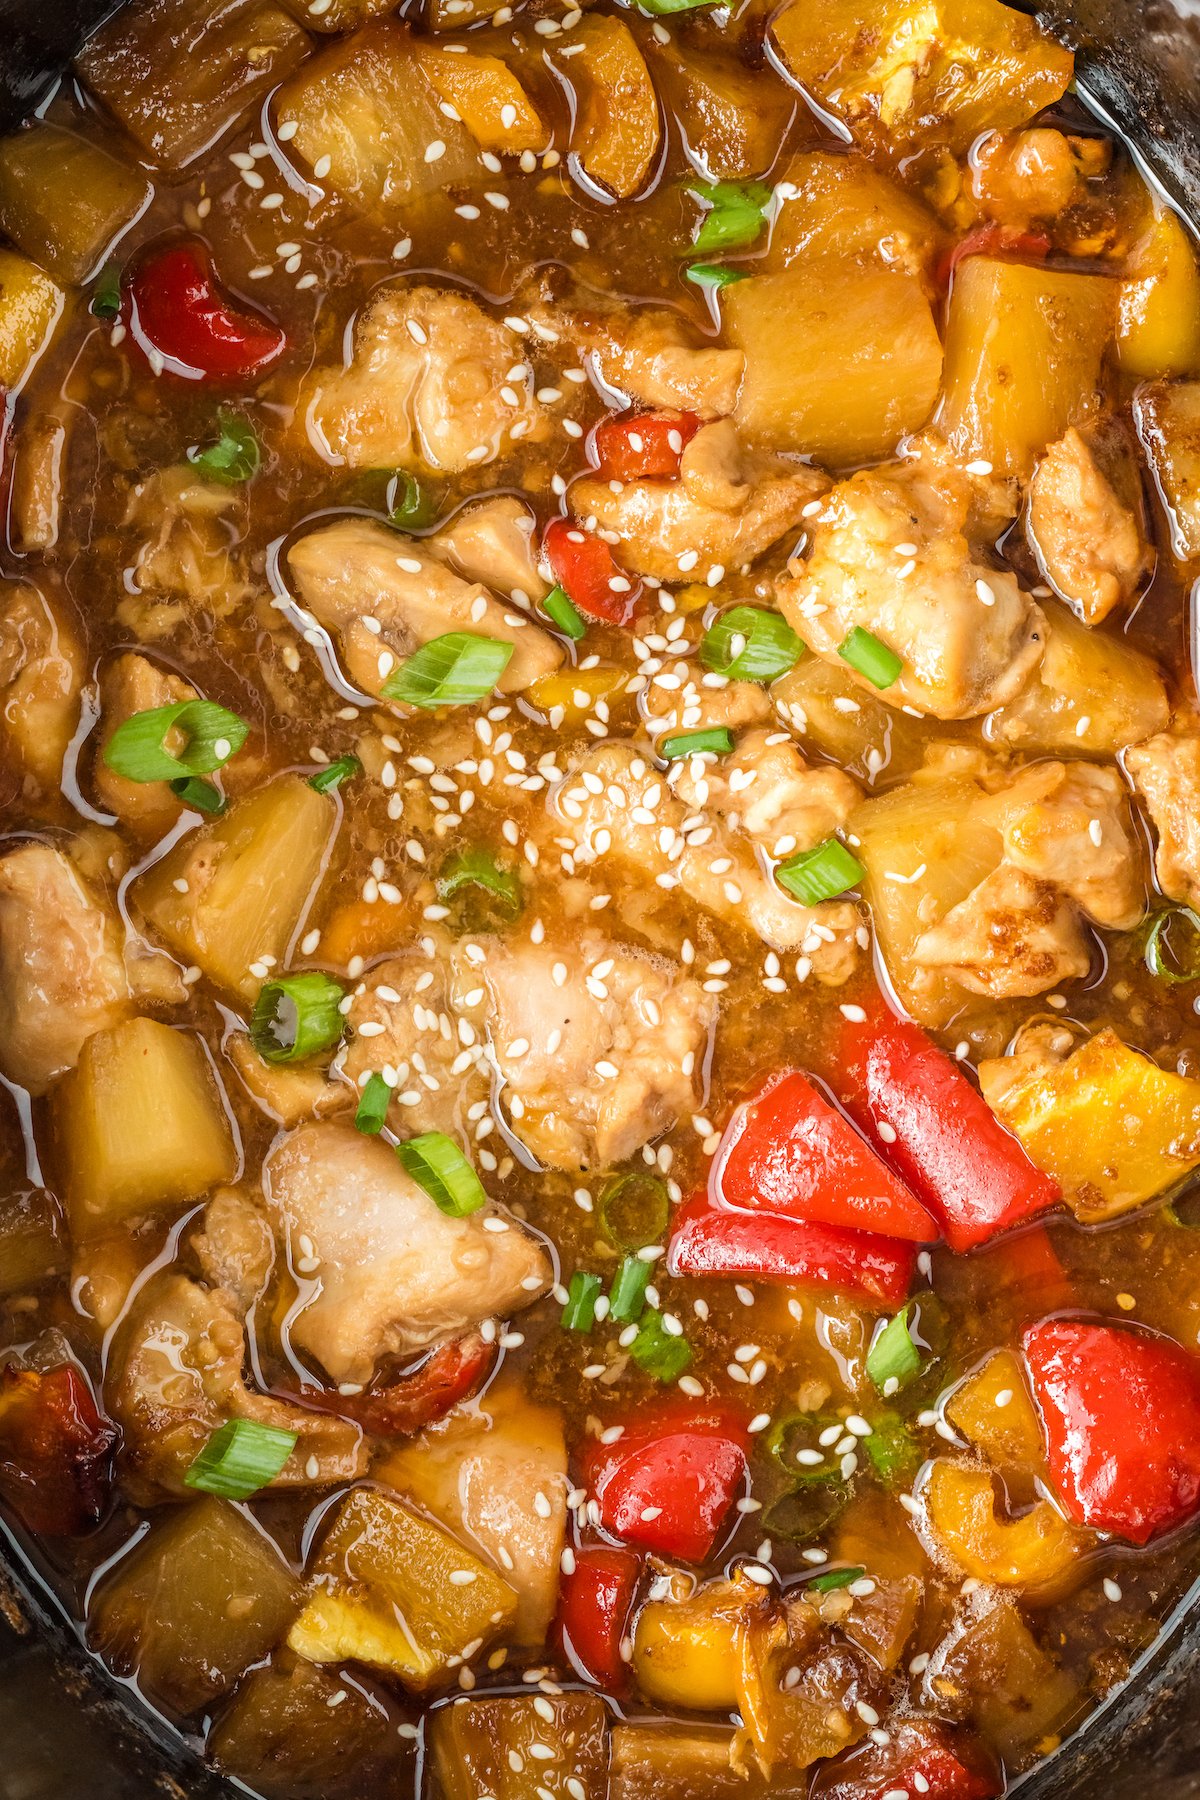 Close up of hawaiian chicken made in a crock pot featuring diced chicken thighs, diced bell peppers, pineapple chunks in a thick brown sauce. Garnished with sesame seeds and green onion.